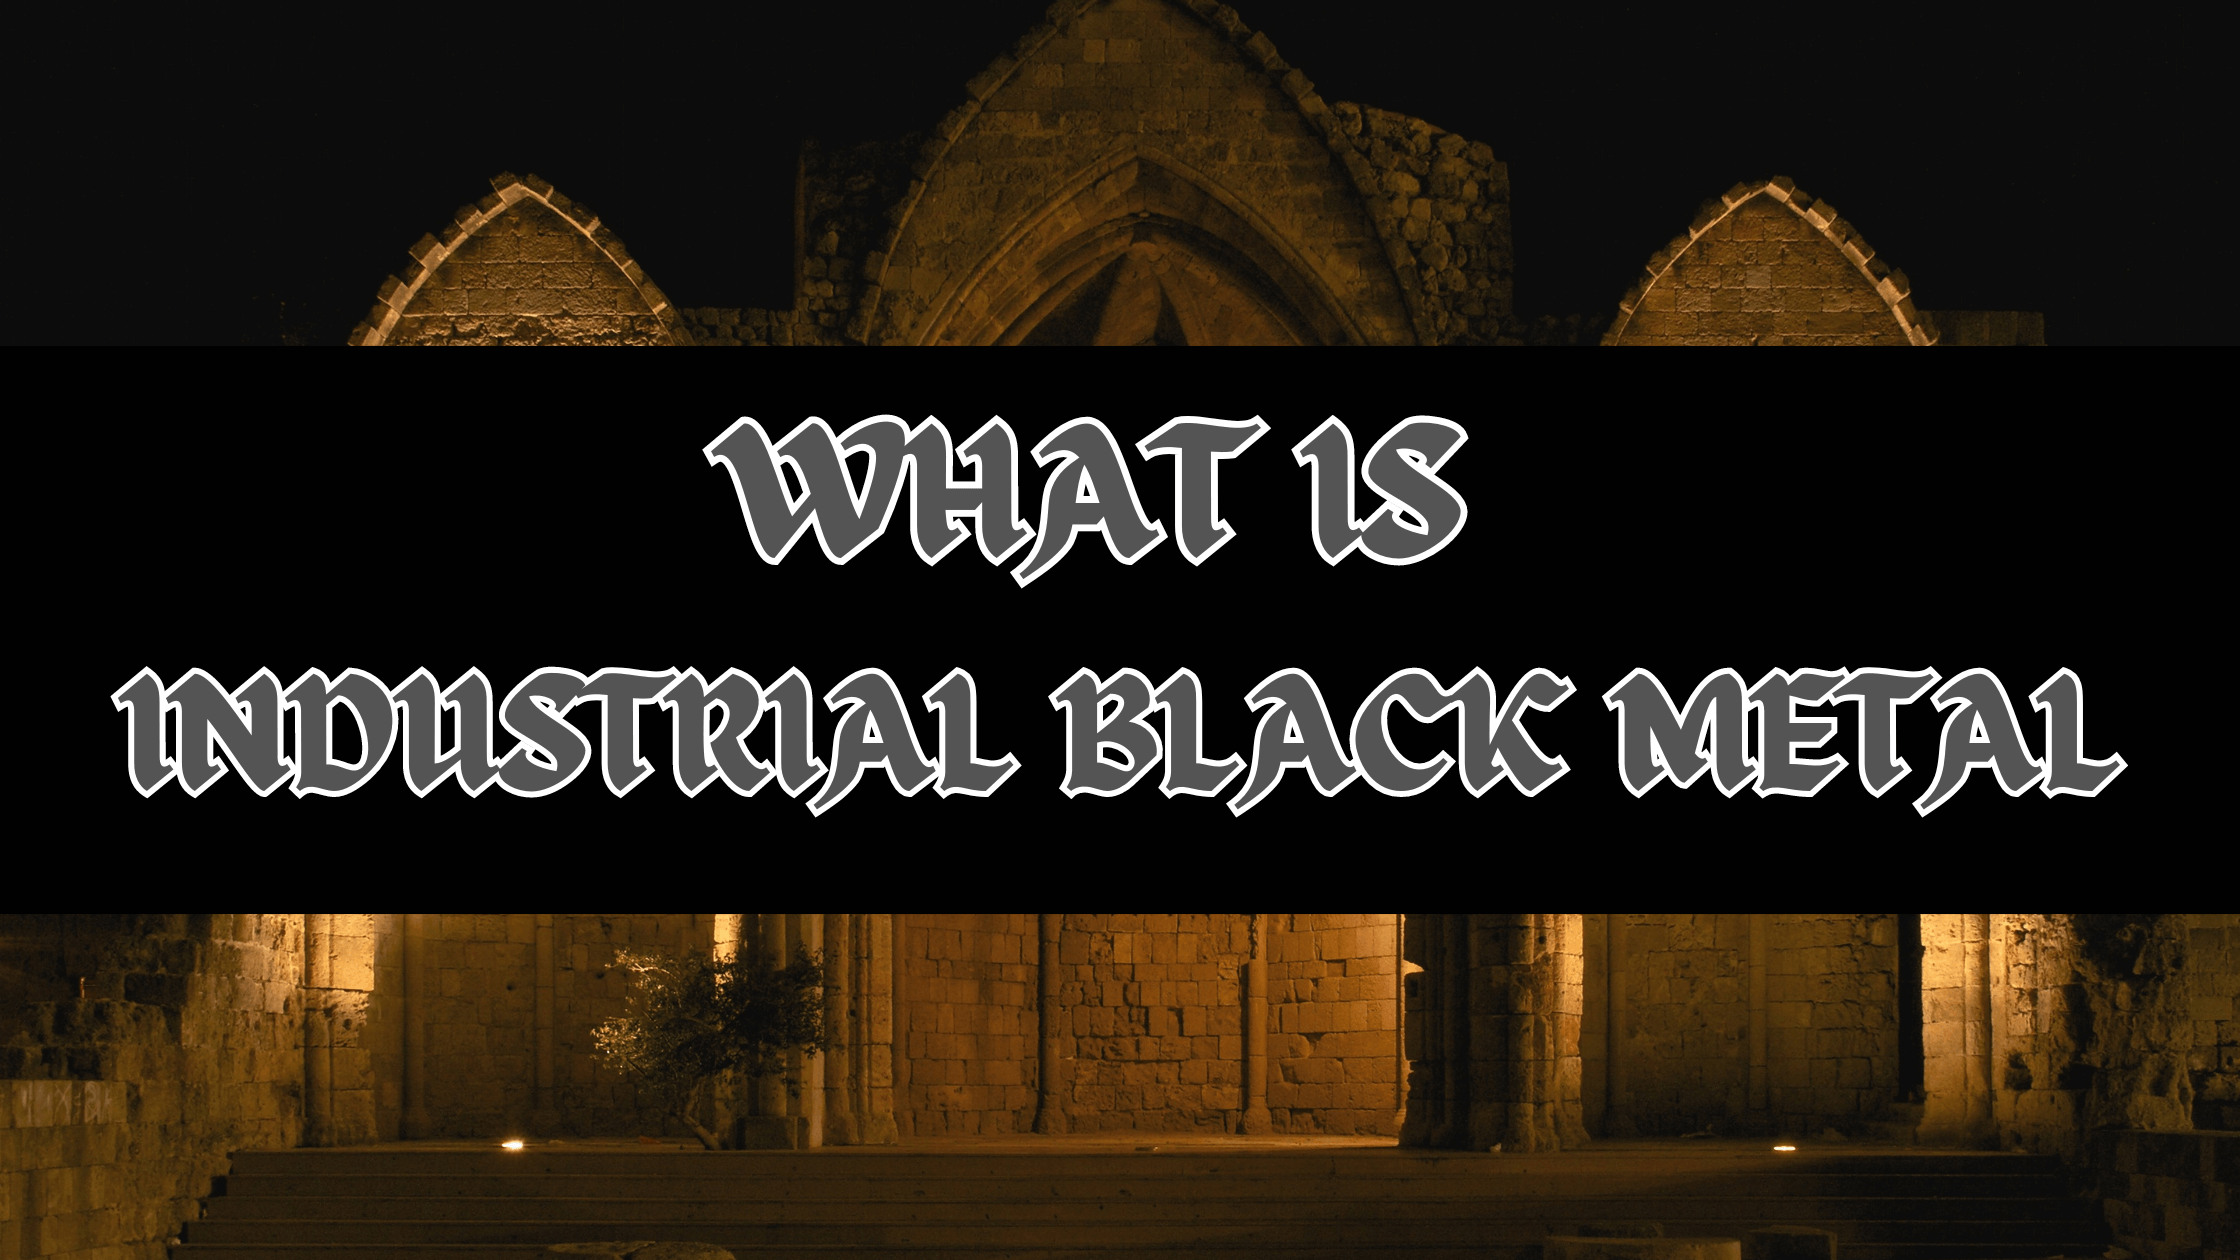 Industrial Black Metal: features and musical characteristics, band, albums, songs and main themes